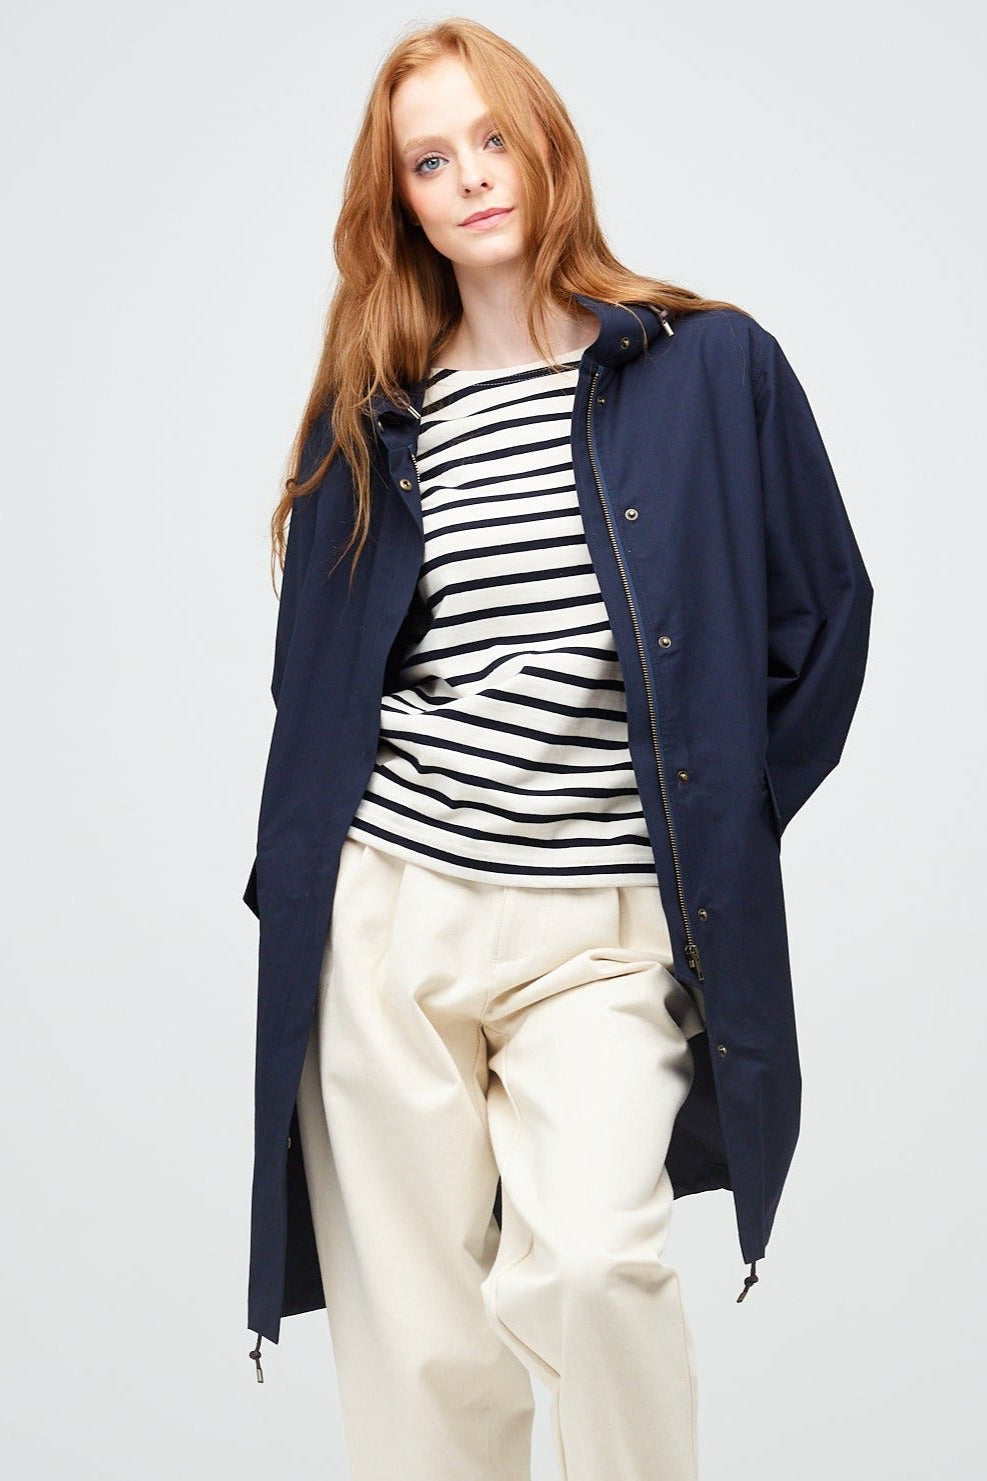 
            A young, white female model with ginger hair wearing a long navy parka unzipped. The parka is styled with a navy striped breton top &amp; ecru jeans.